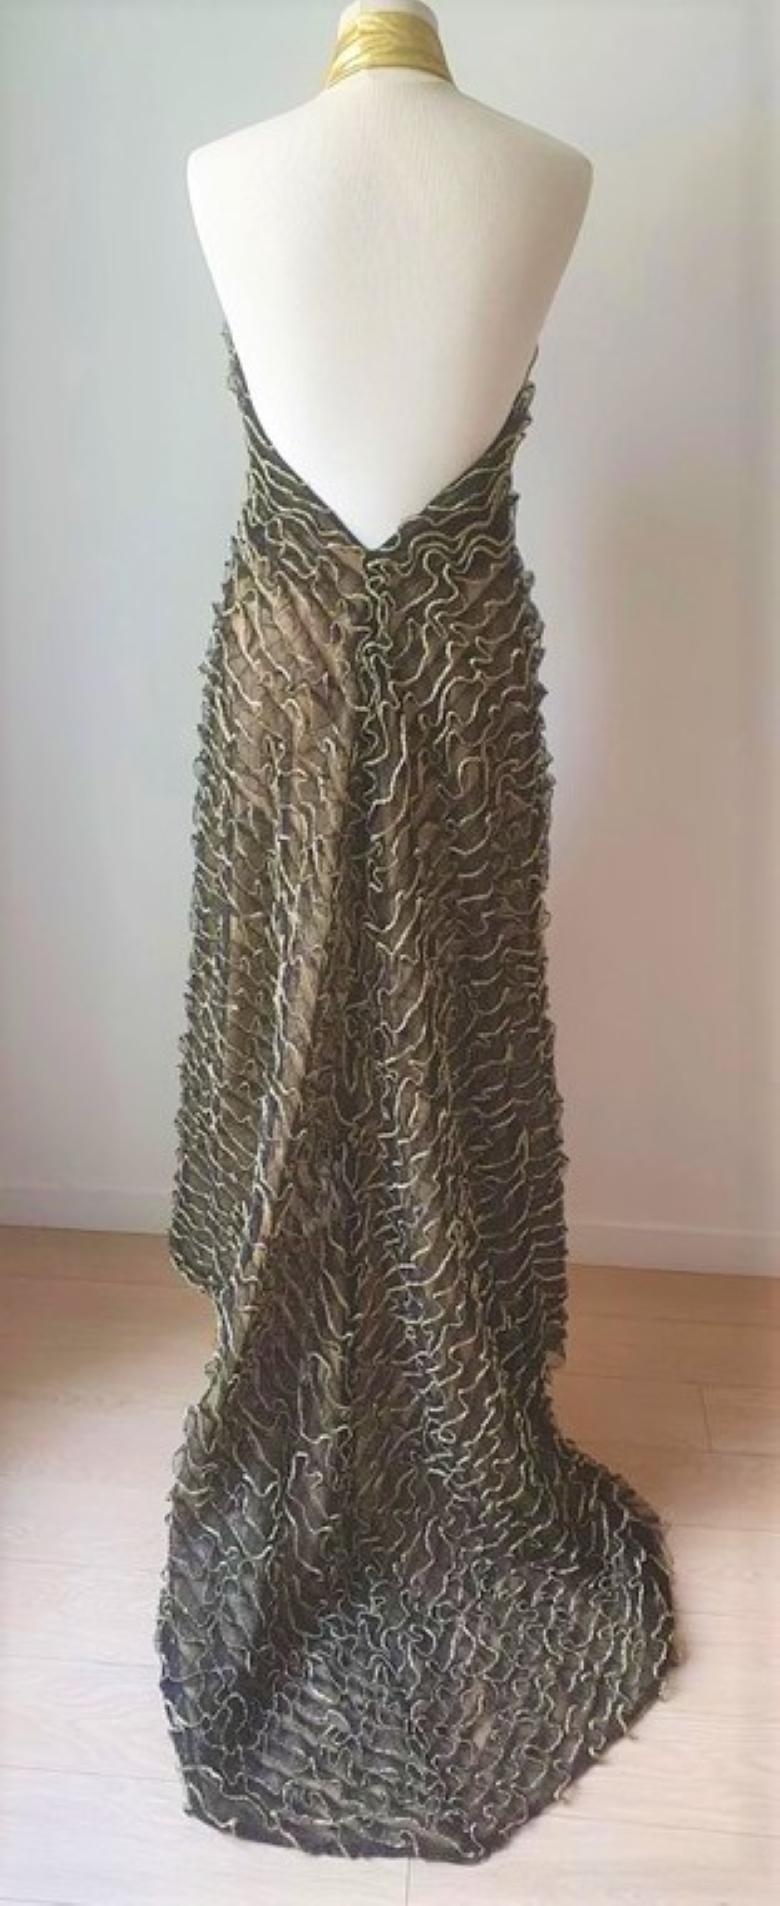 Early PACO RABANNE Vintage Silver Gold Evening Prom Grown Metal Dress For Sale 11